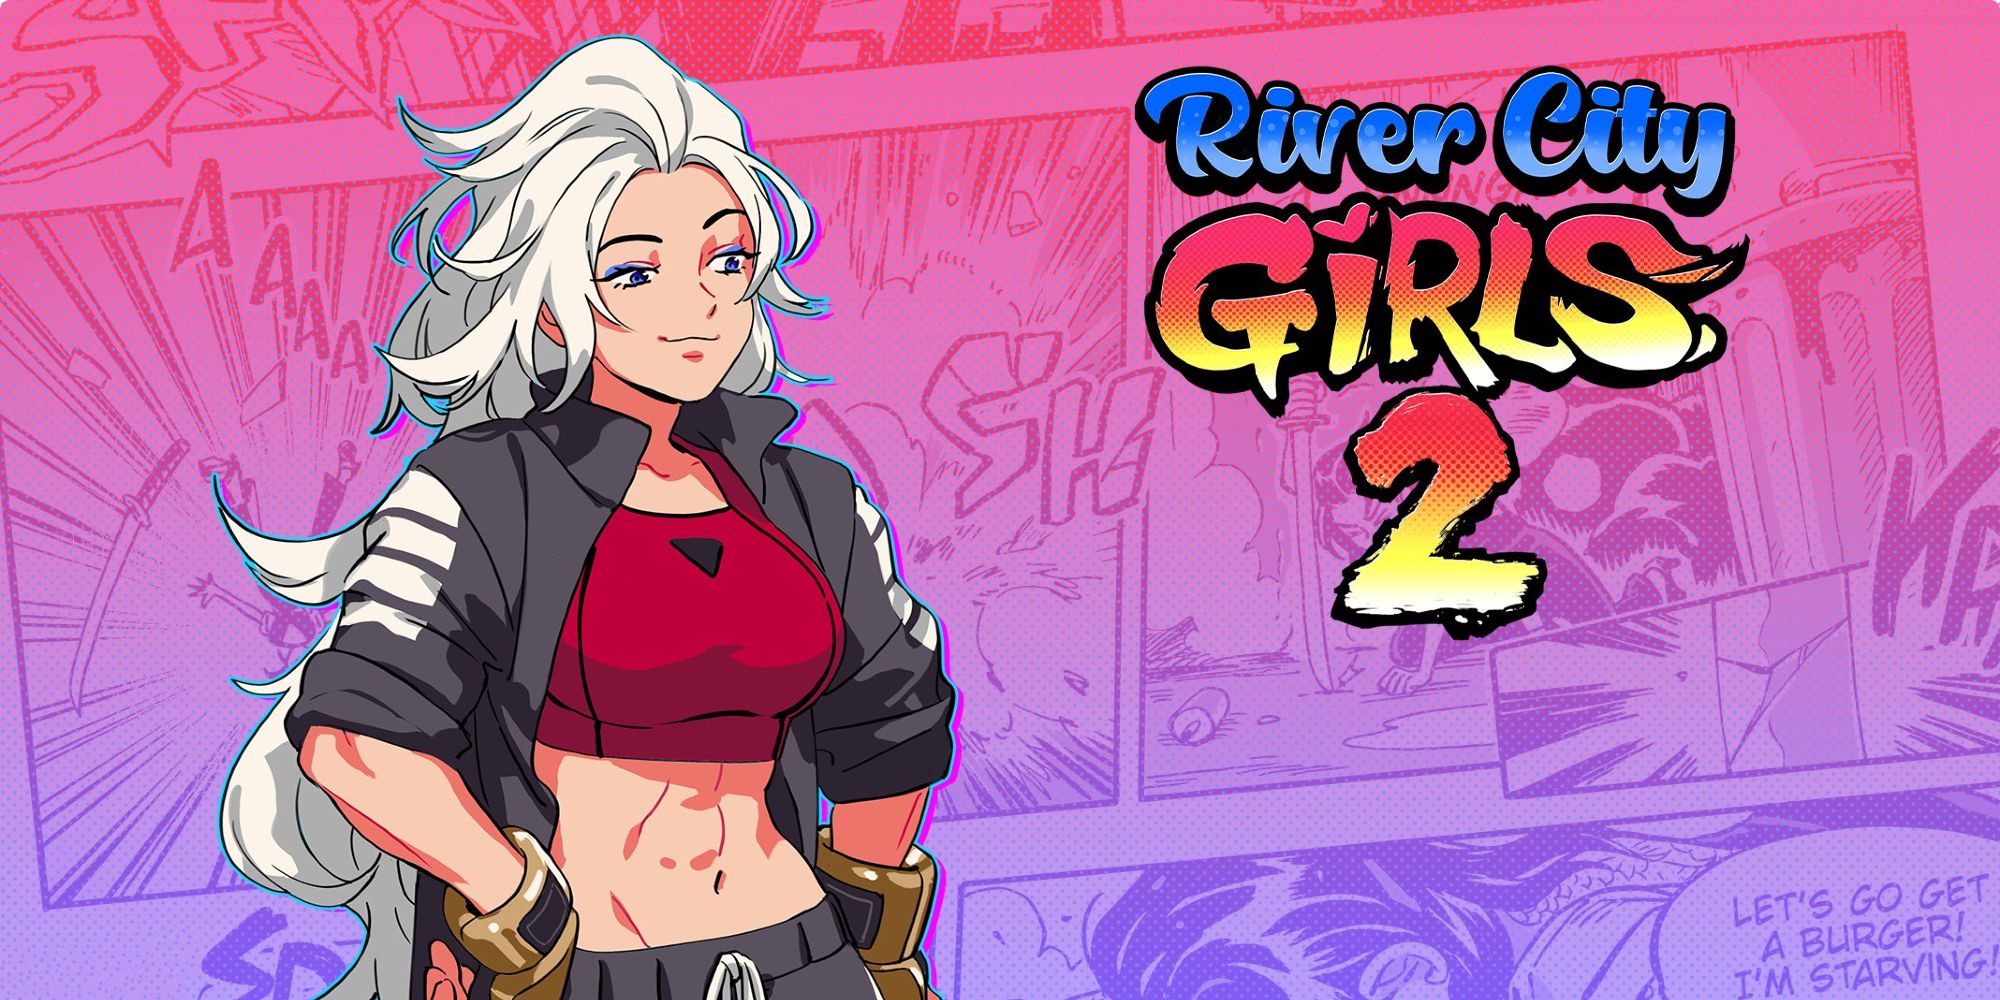 River City Girls 2's New Playable Characters Have Been Revealed